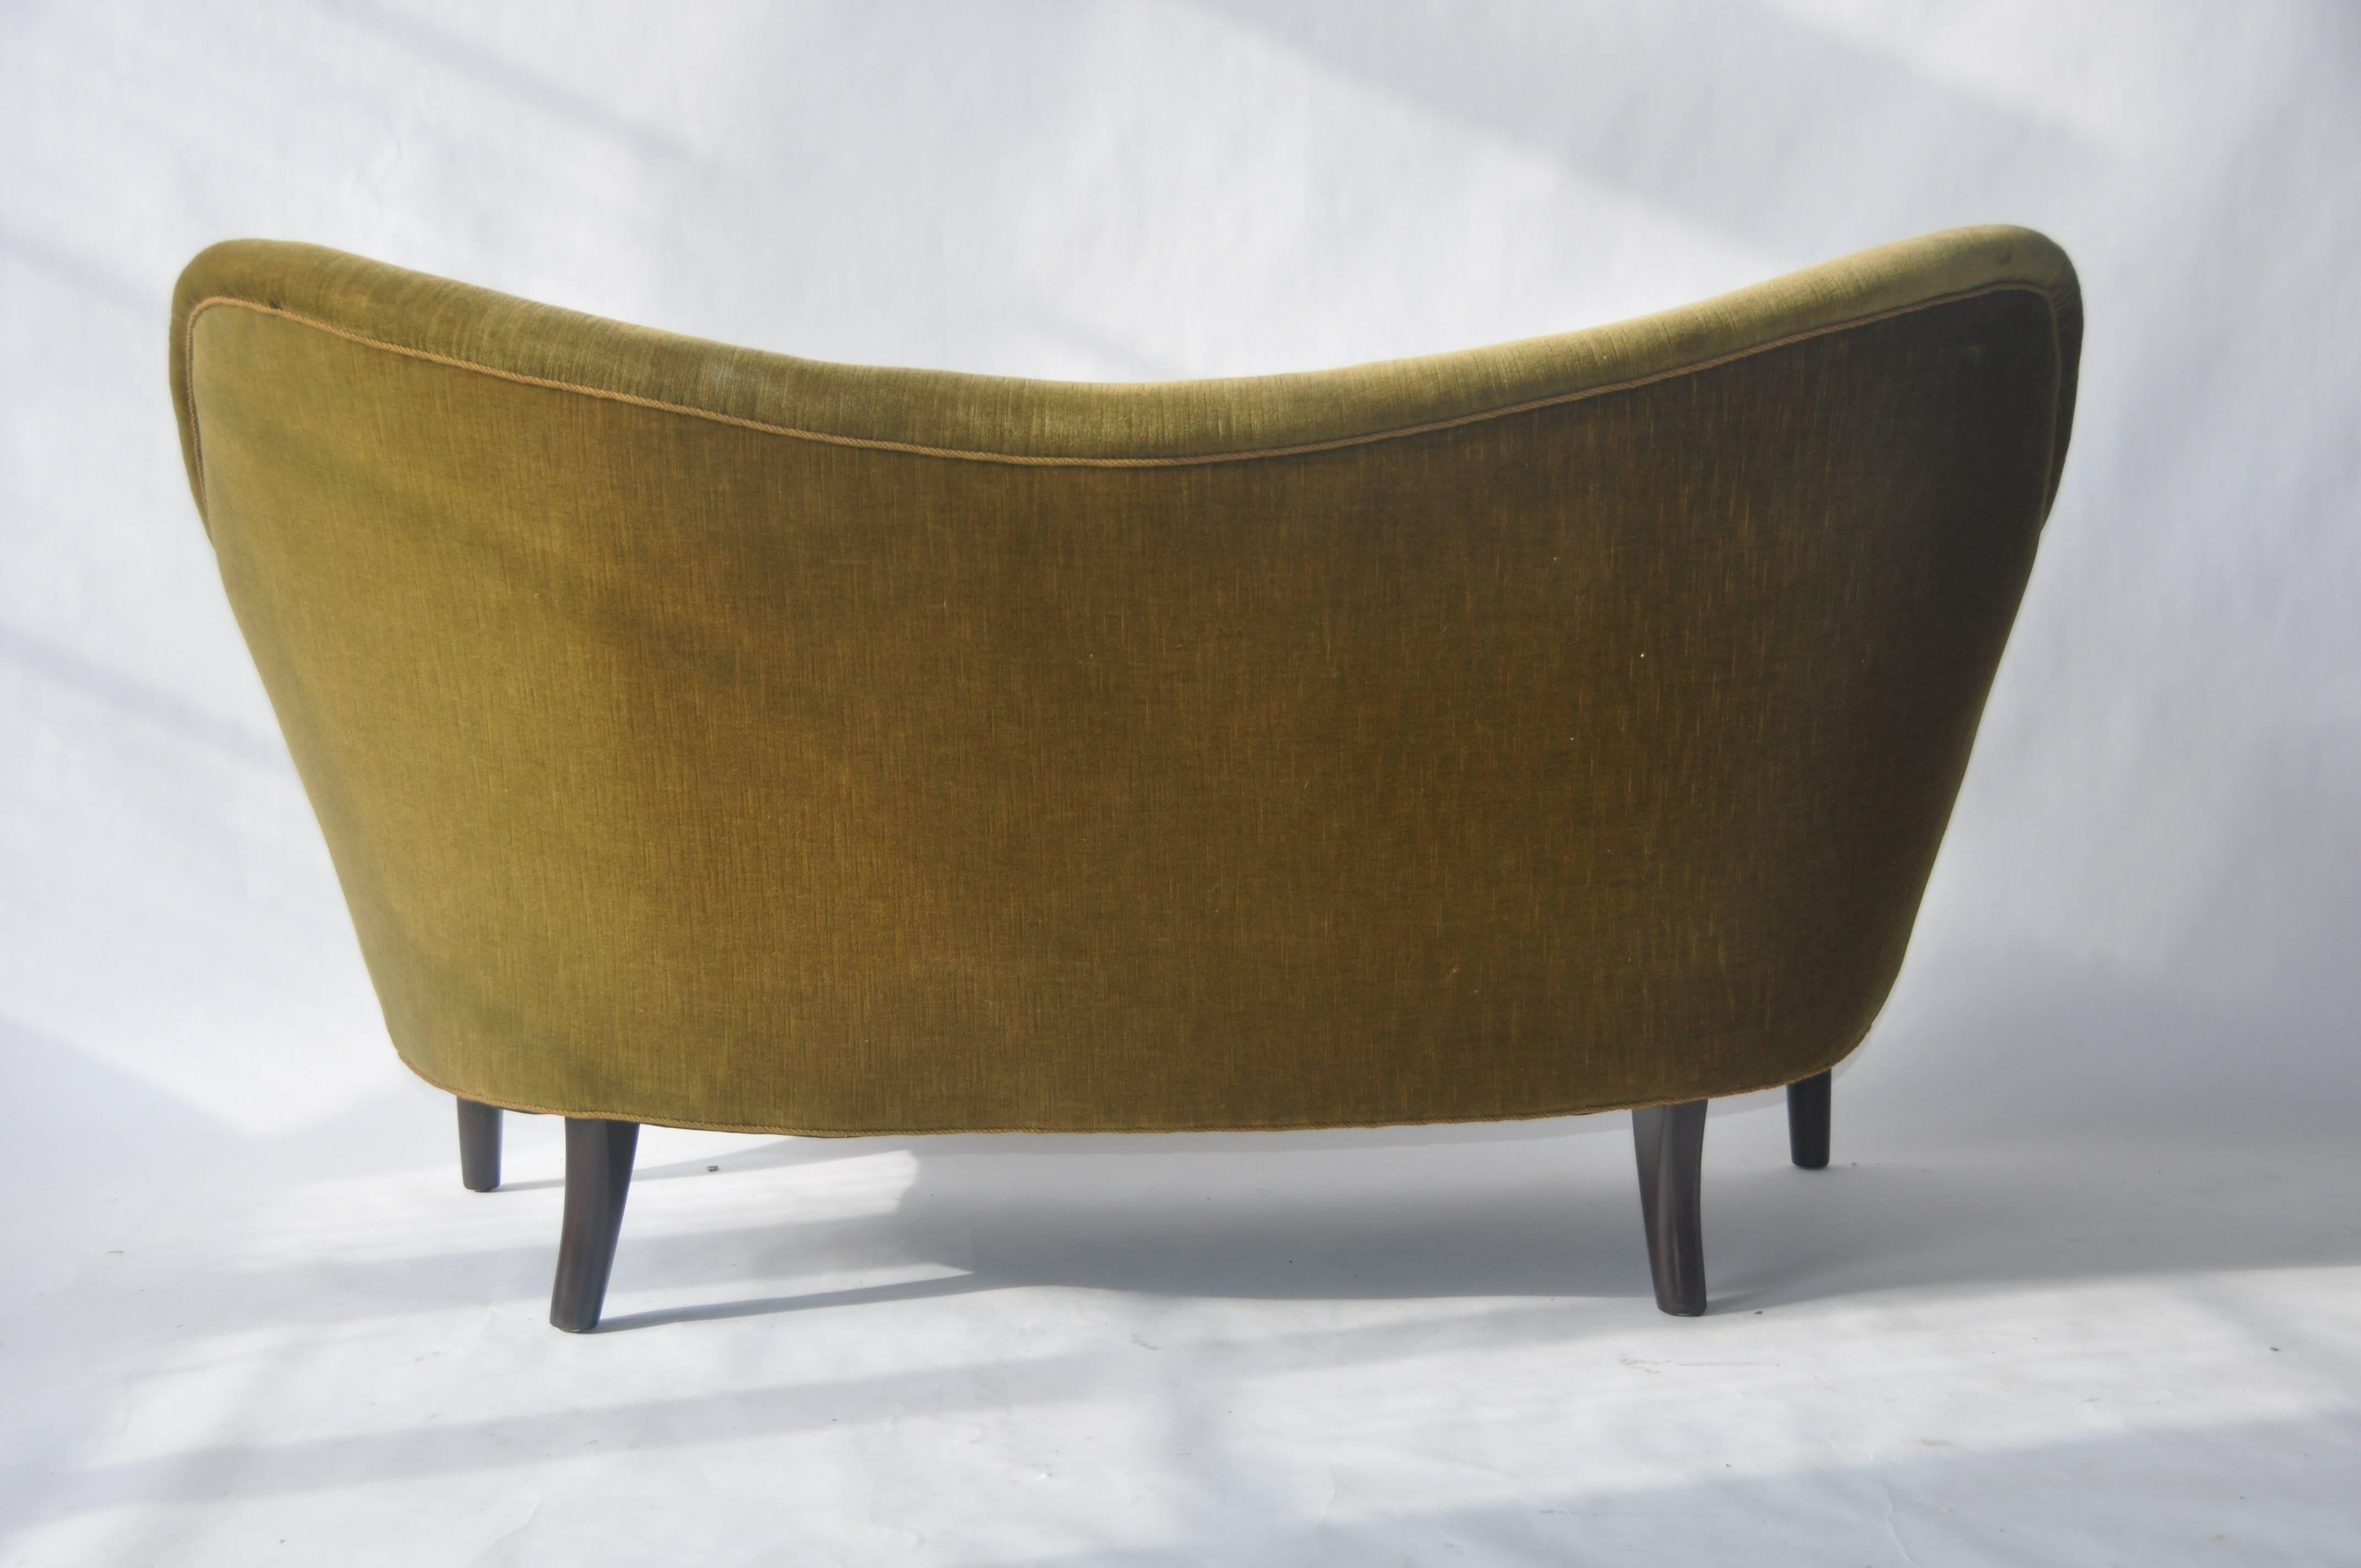 Stained Petite Sculptural Danish Sofa For Sale